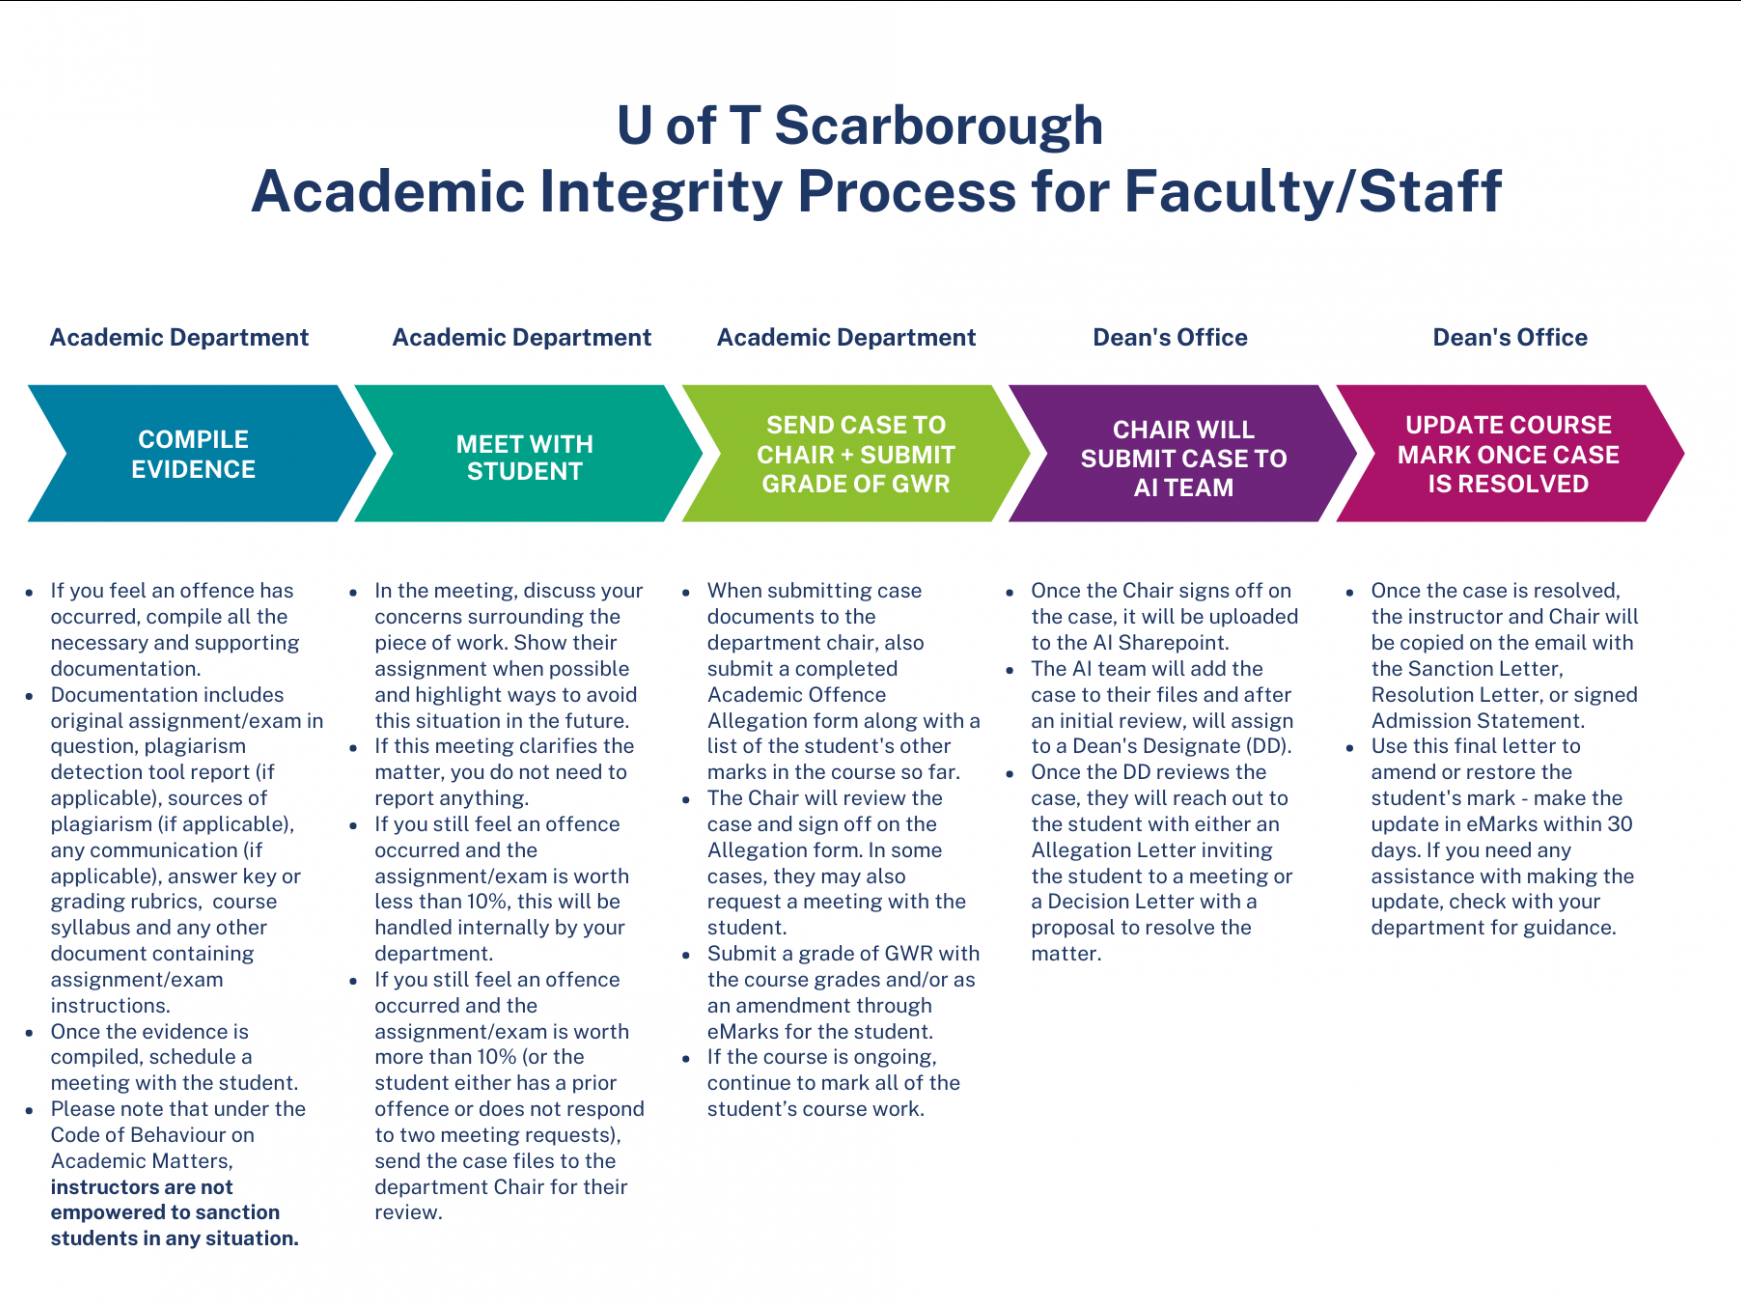 Flow chart of Academic Integrity Process for Faculty/Staff